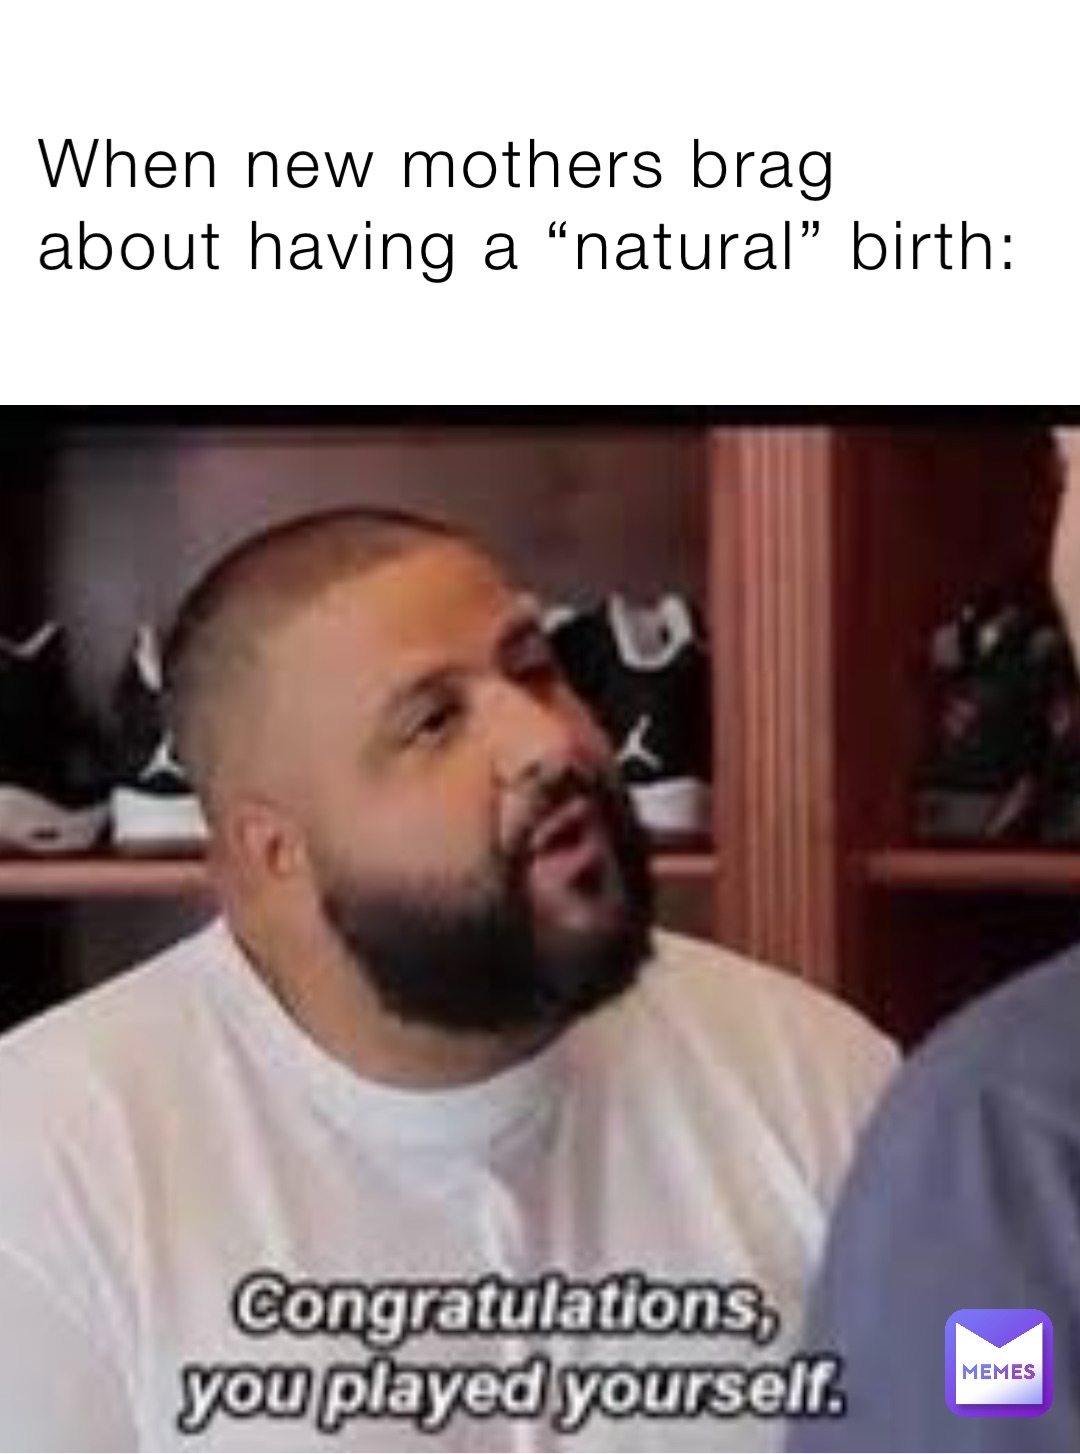 When new mothers brag about having a “natural” birth: